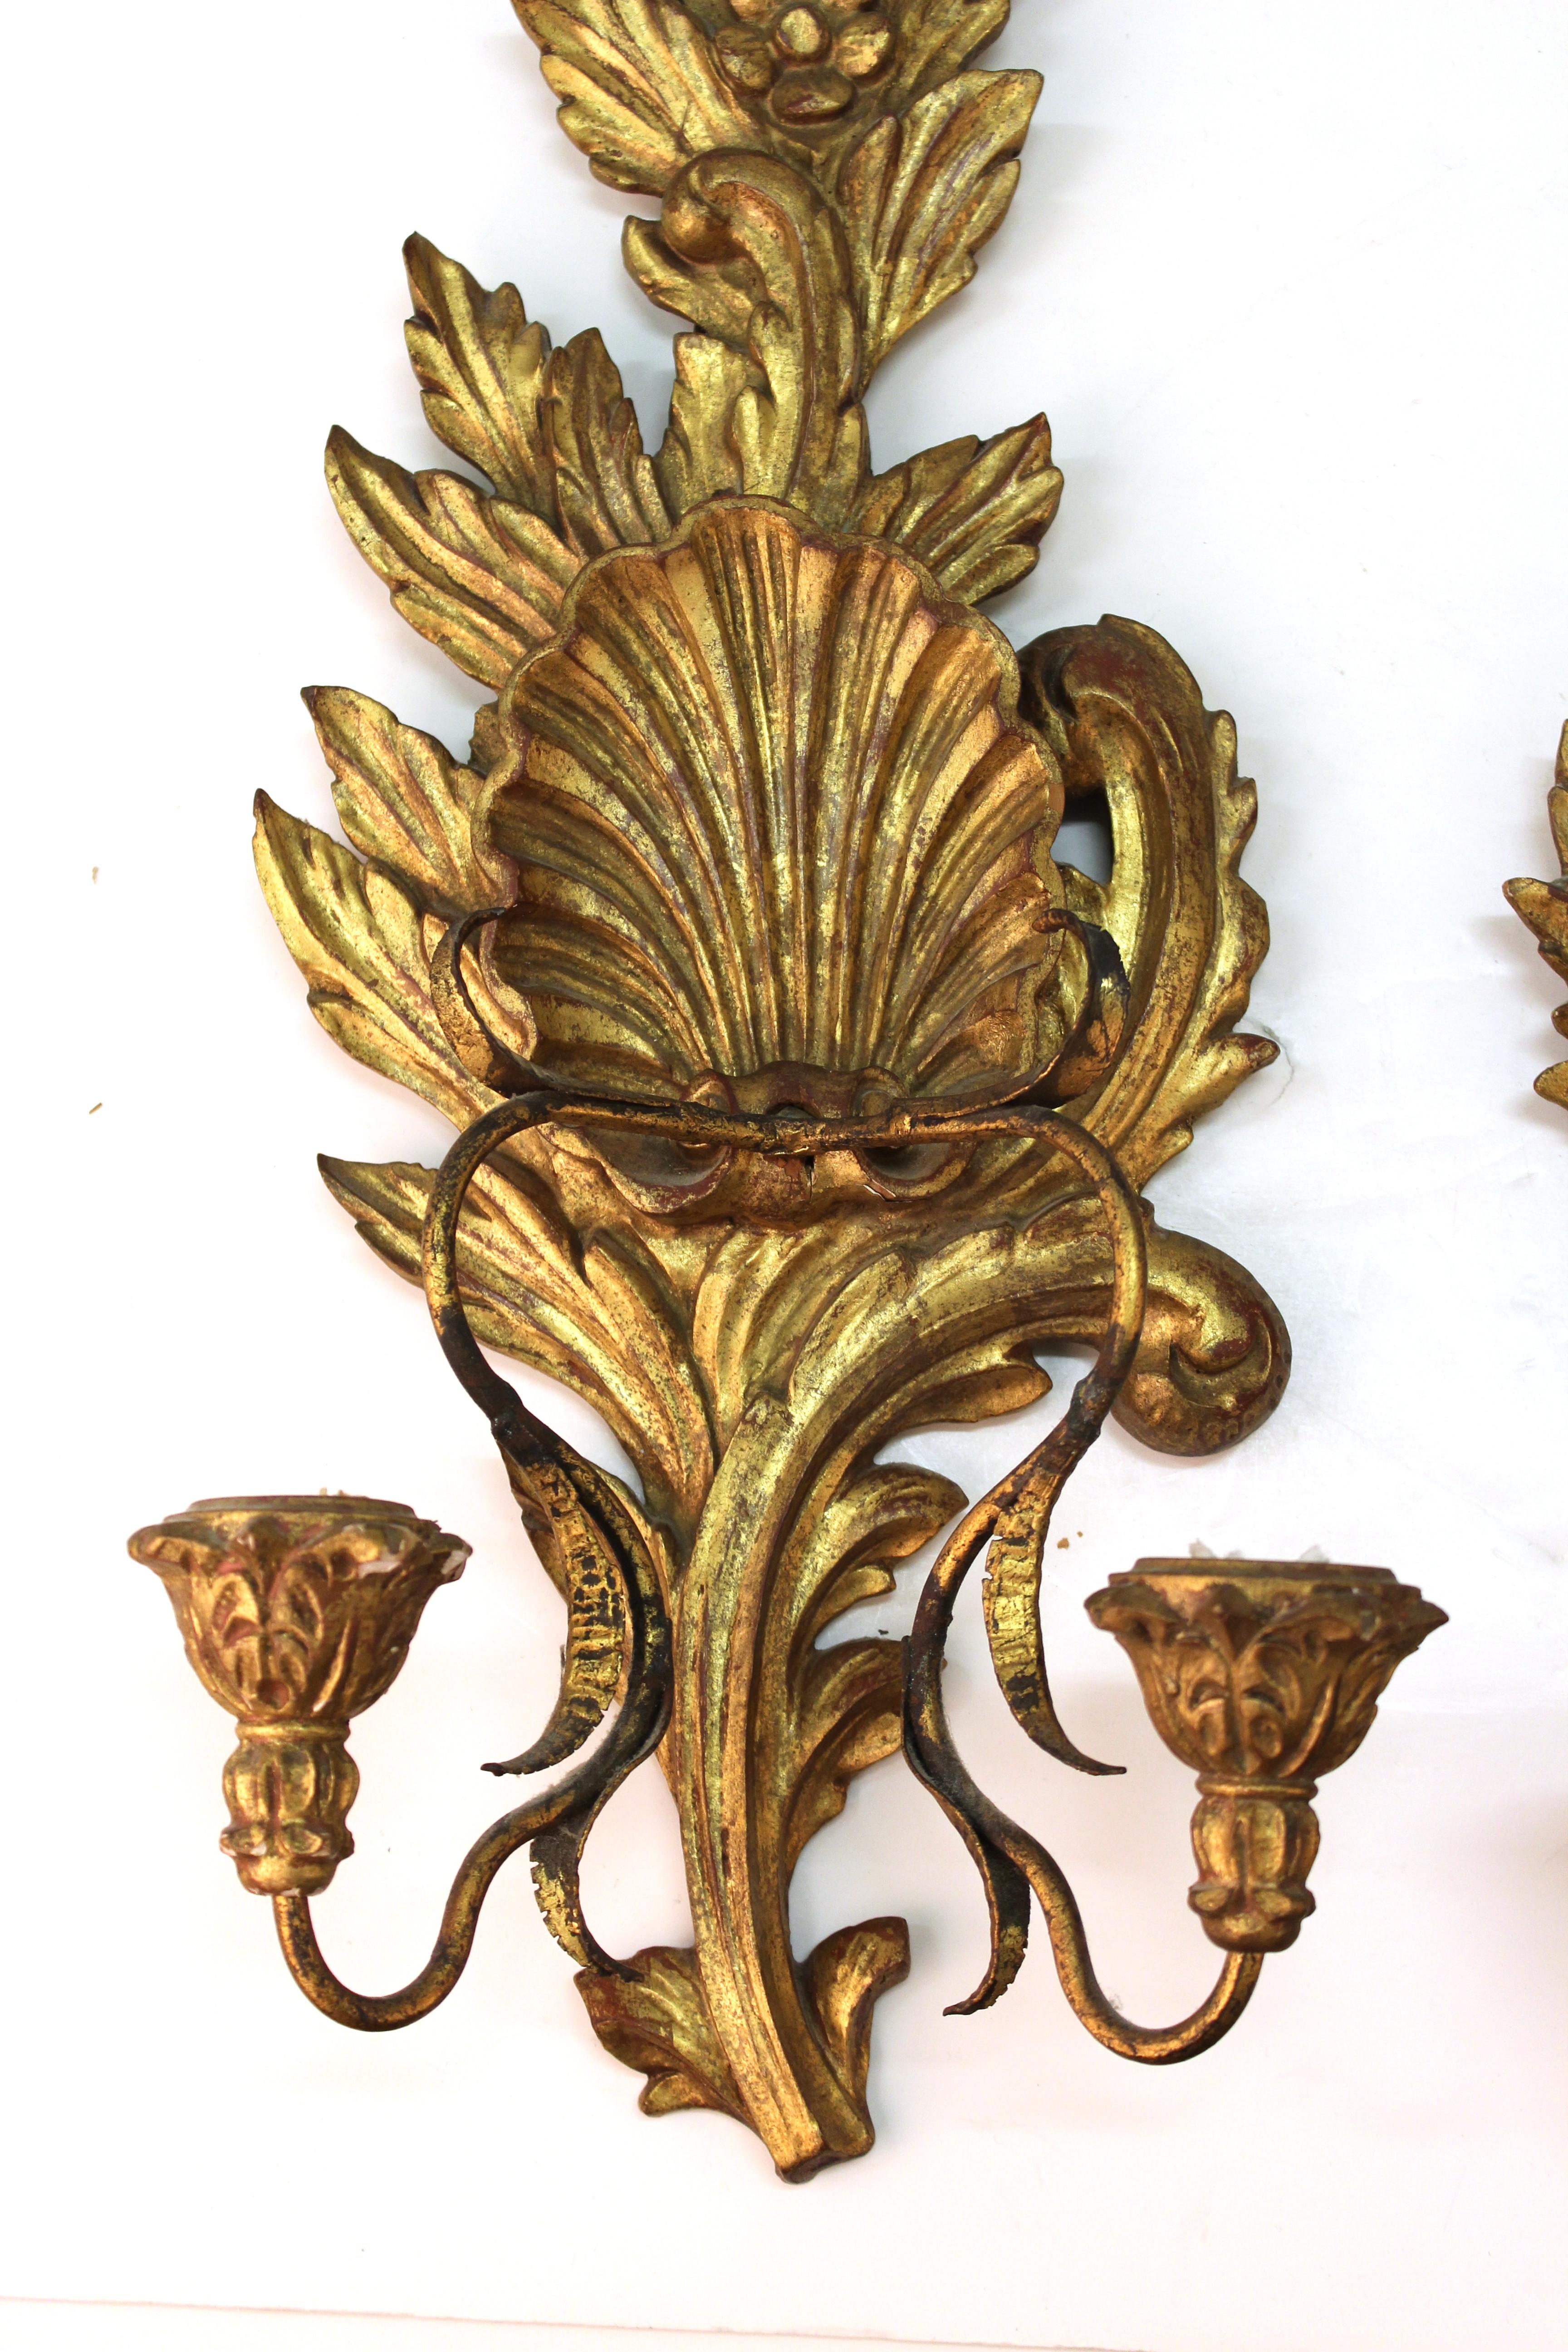 Italian Baroque style pair of wall candleholders in giltwood. Each one has scalloped shells, flowers and foliage with acanthus leaf candle cups and both backs have stamps 'Made in Italy', one with an old paper label. In good vintage condition.